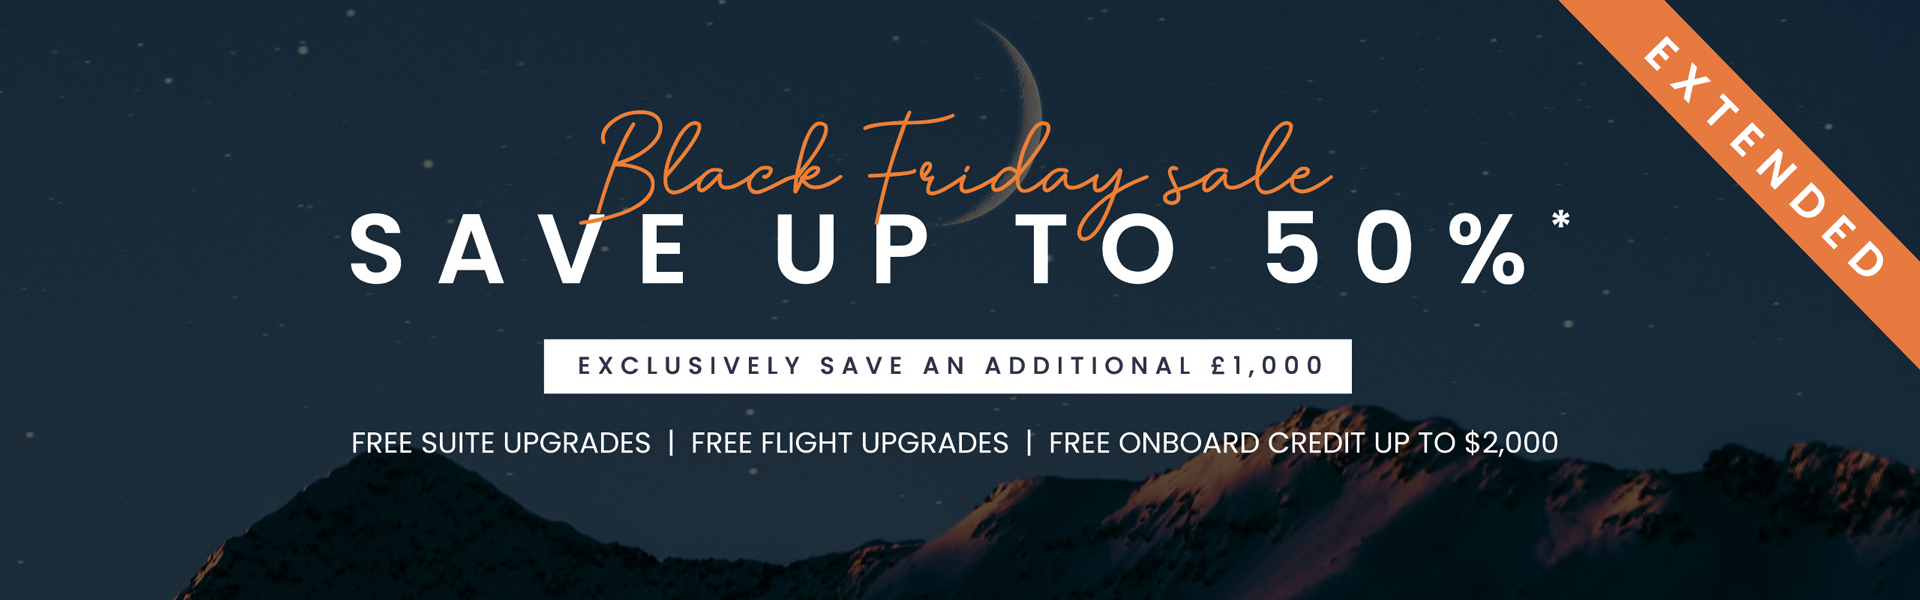 Black Friday Cruise Sale Extended